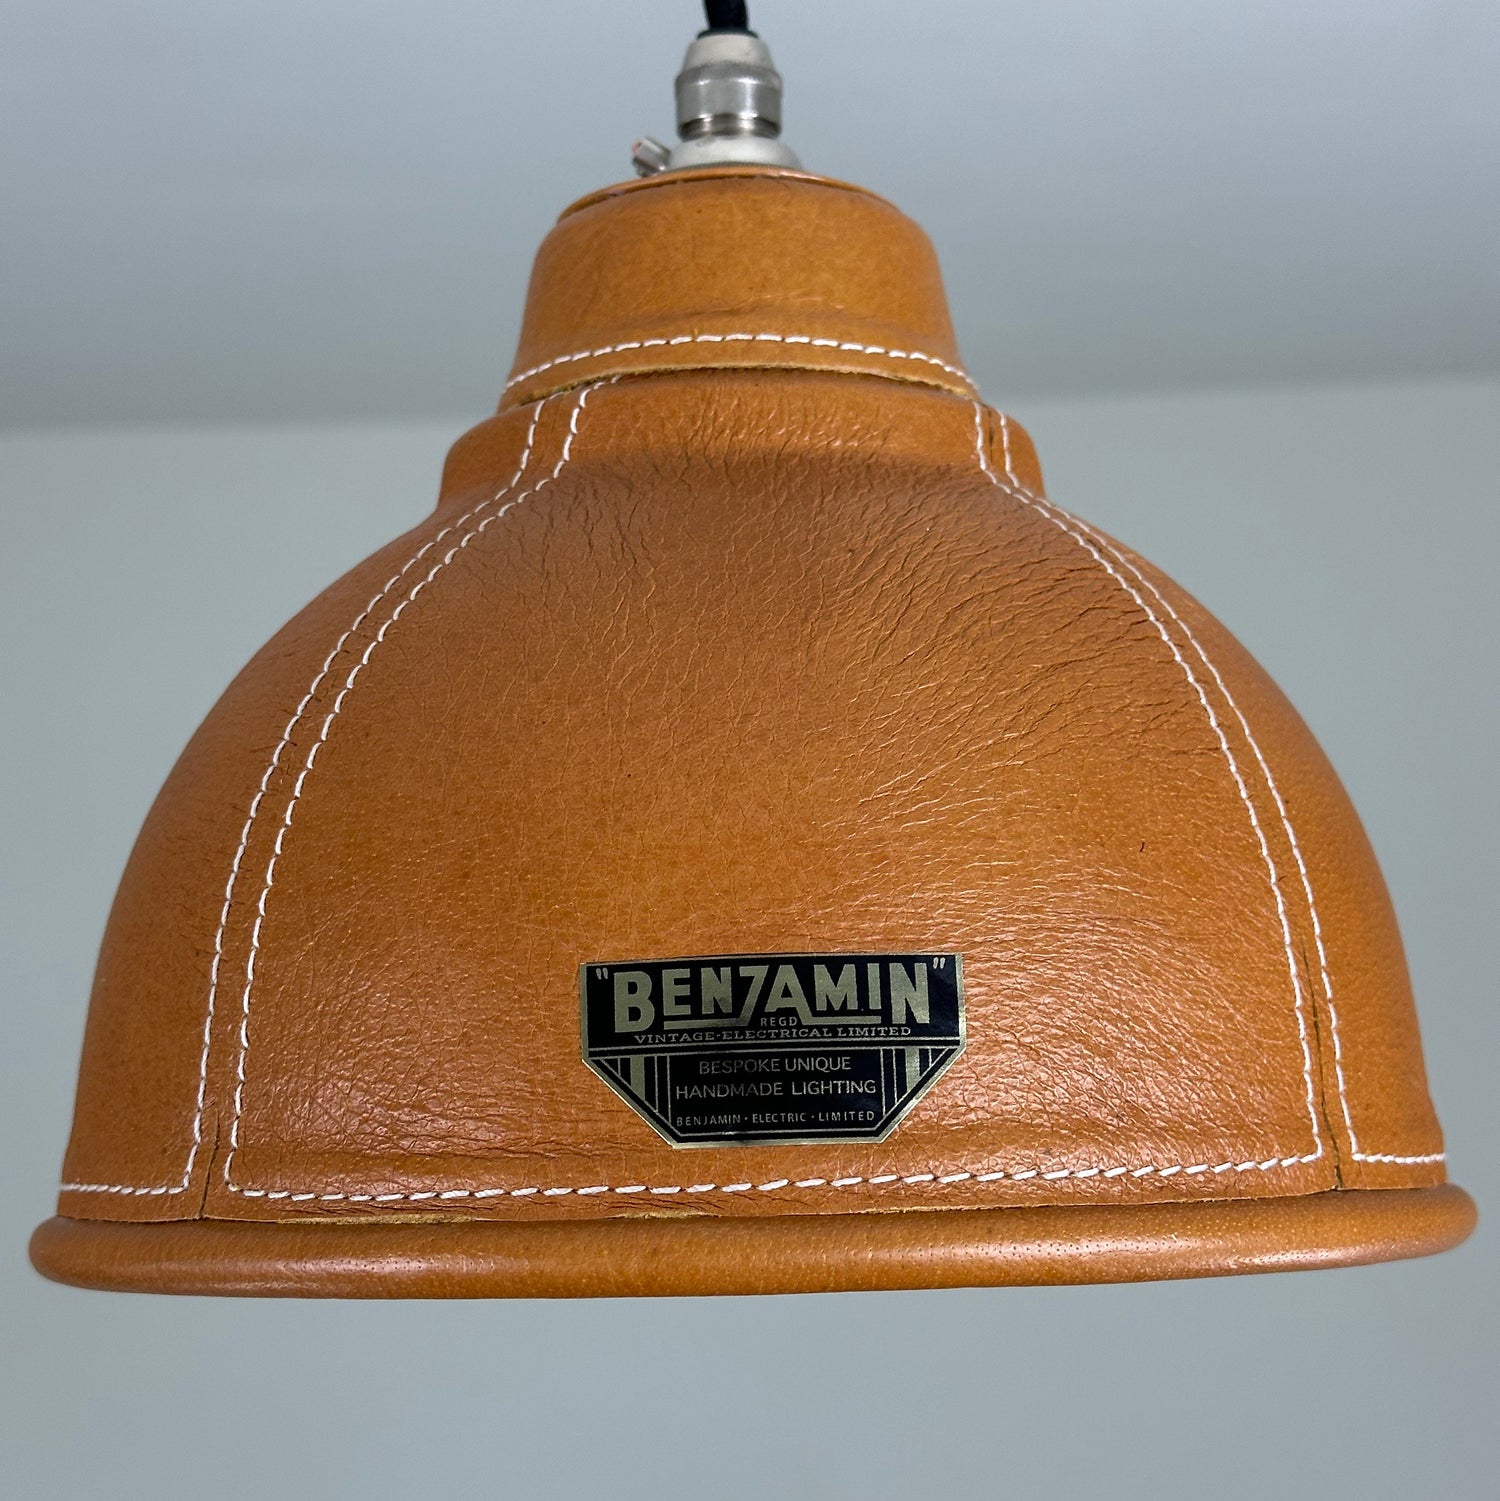 Trimingham ~ Real Genuine Leather Hand Stitched Solid Shade Light | Ceiling Dining Room | Kitchen Table | Vintage